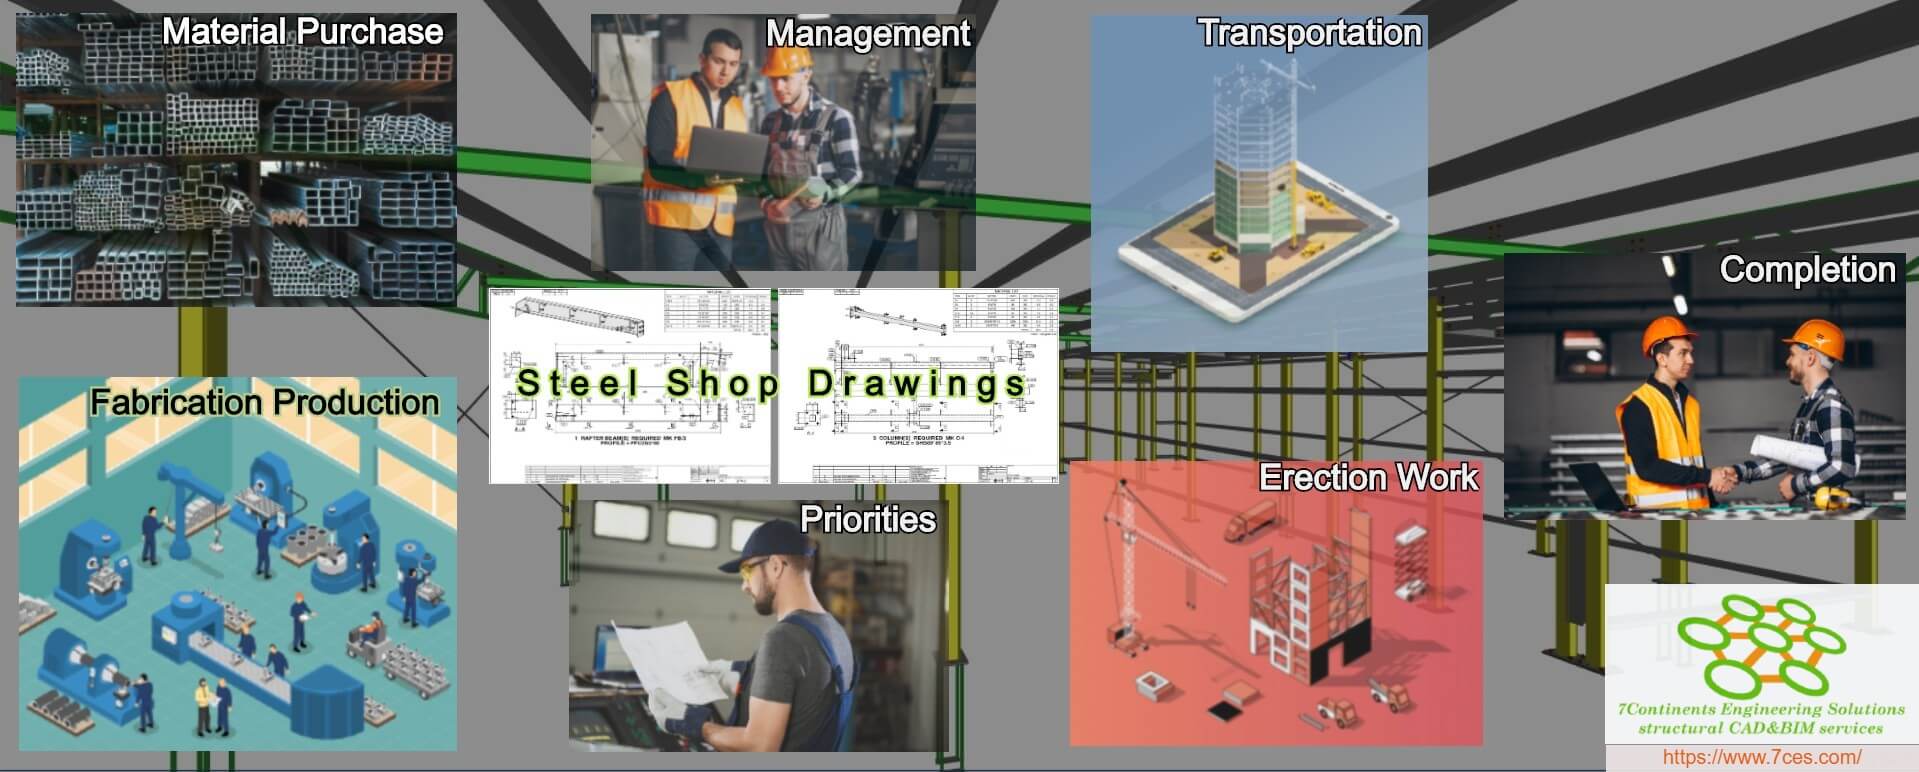 Steel Shop Drawings- How It Makes Fabrication Easy!